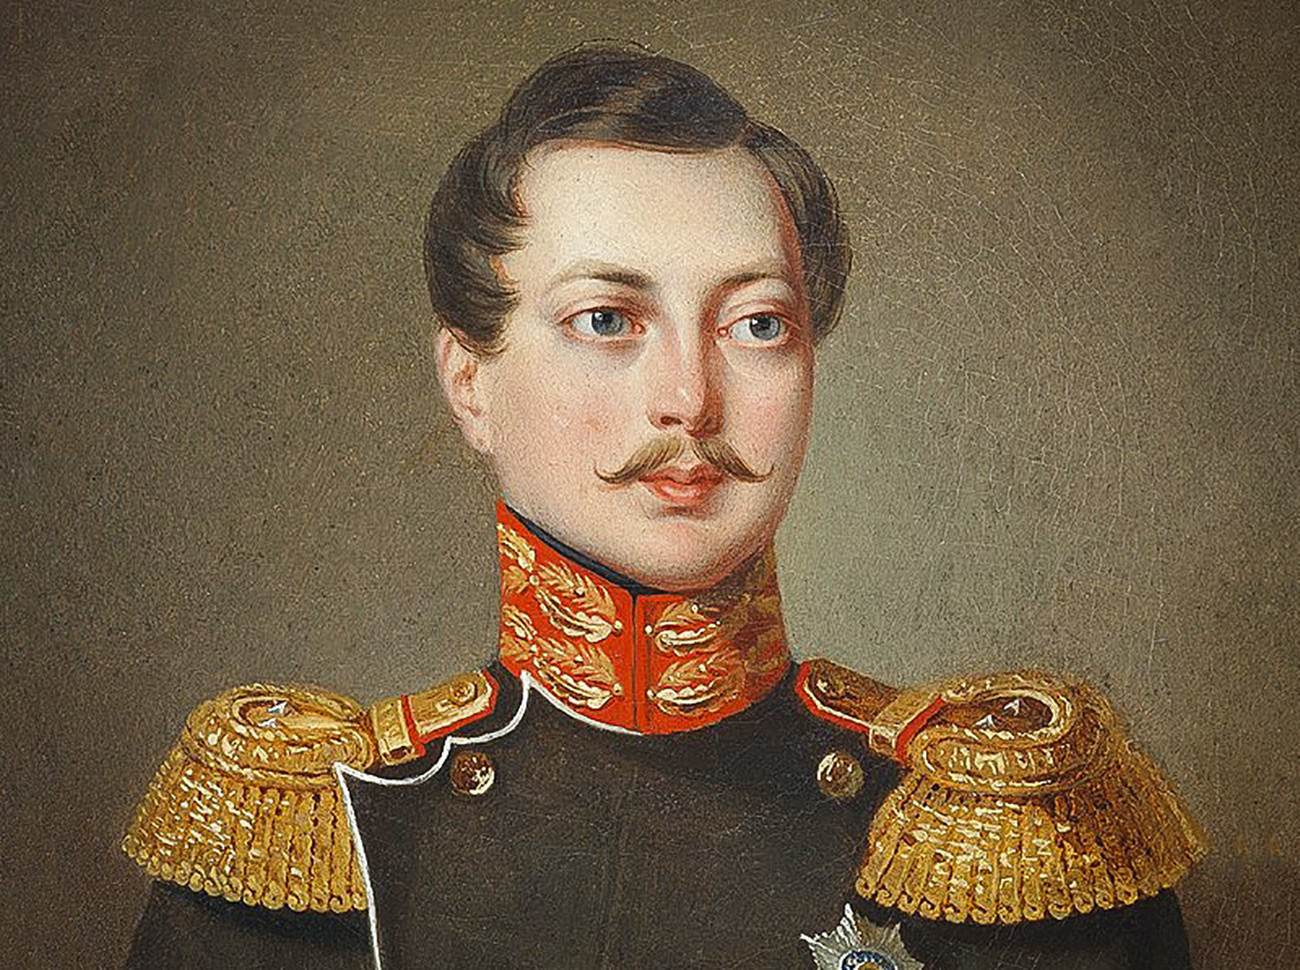 Young Alexander II, back then - tsarevich and heir to the Russian throne.